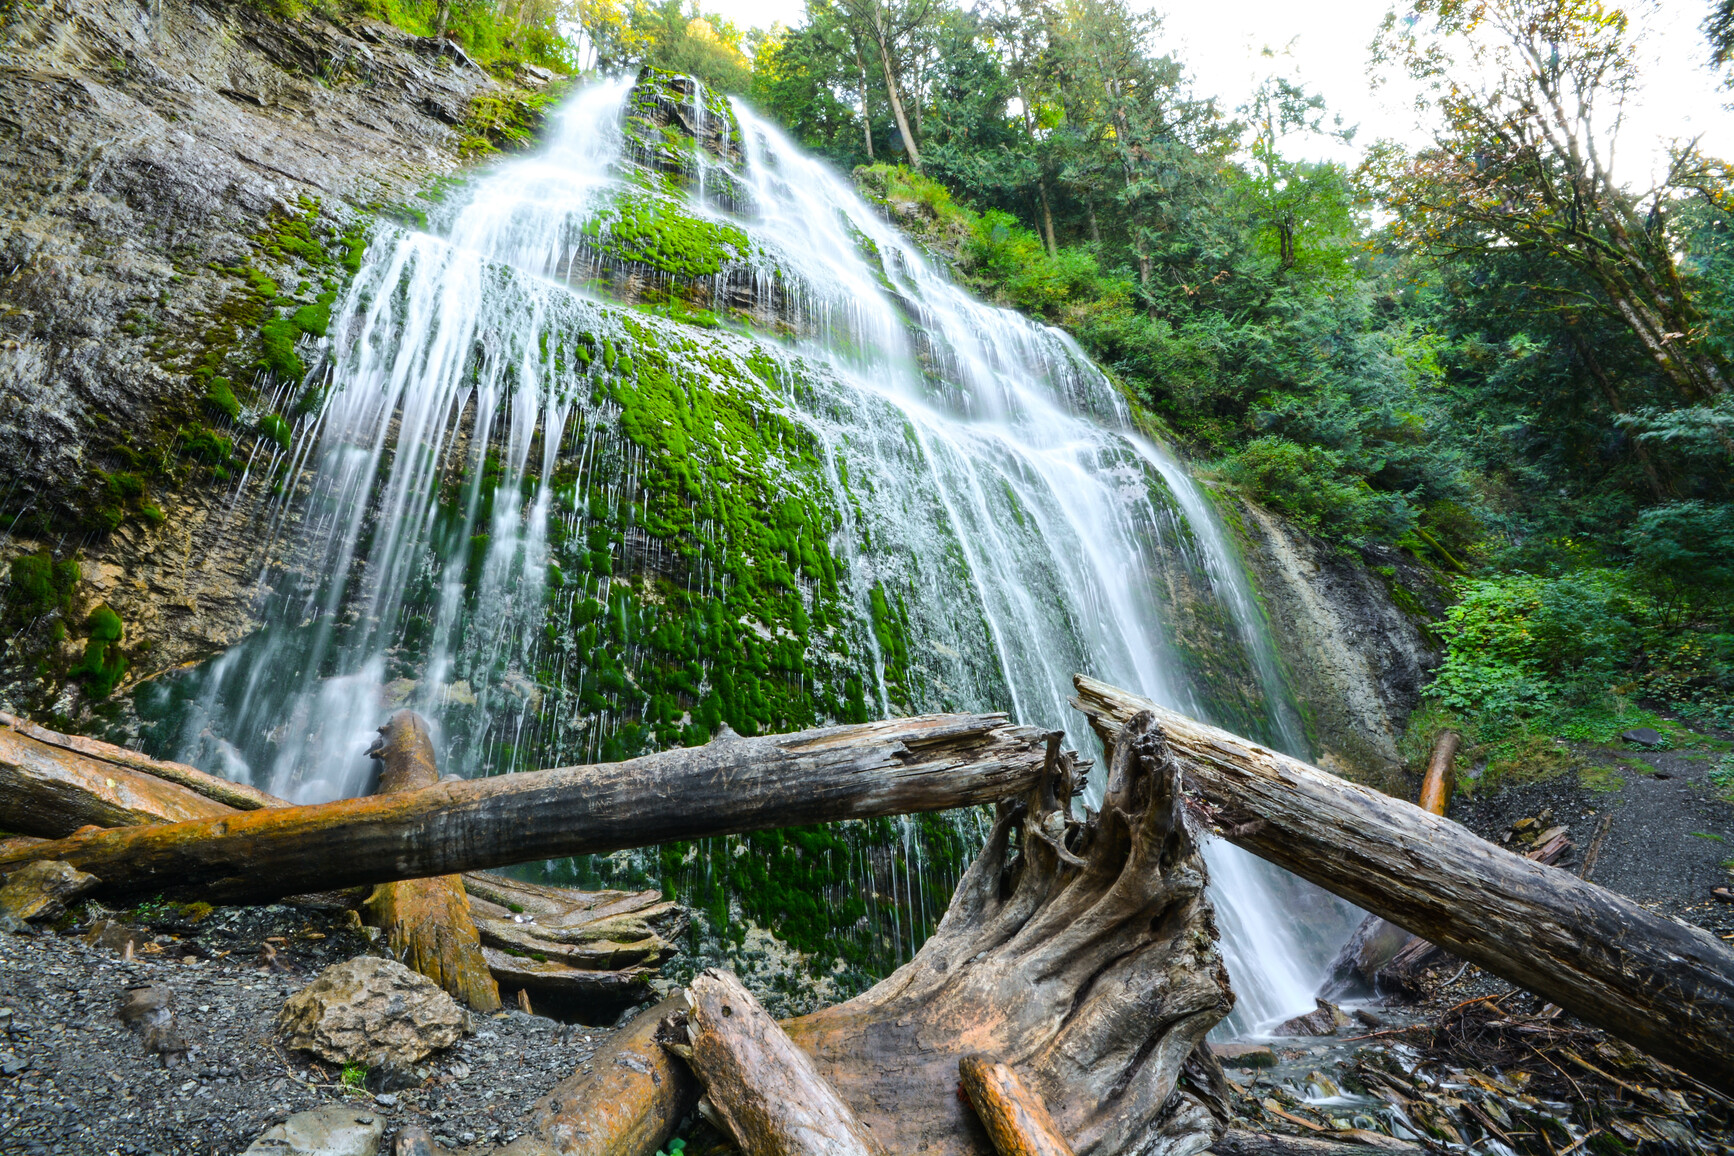 Bridal Veil Falls cascading down moss covered walls. Fallen logs lay at the bottom of the falls.